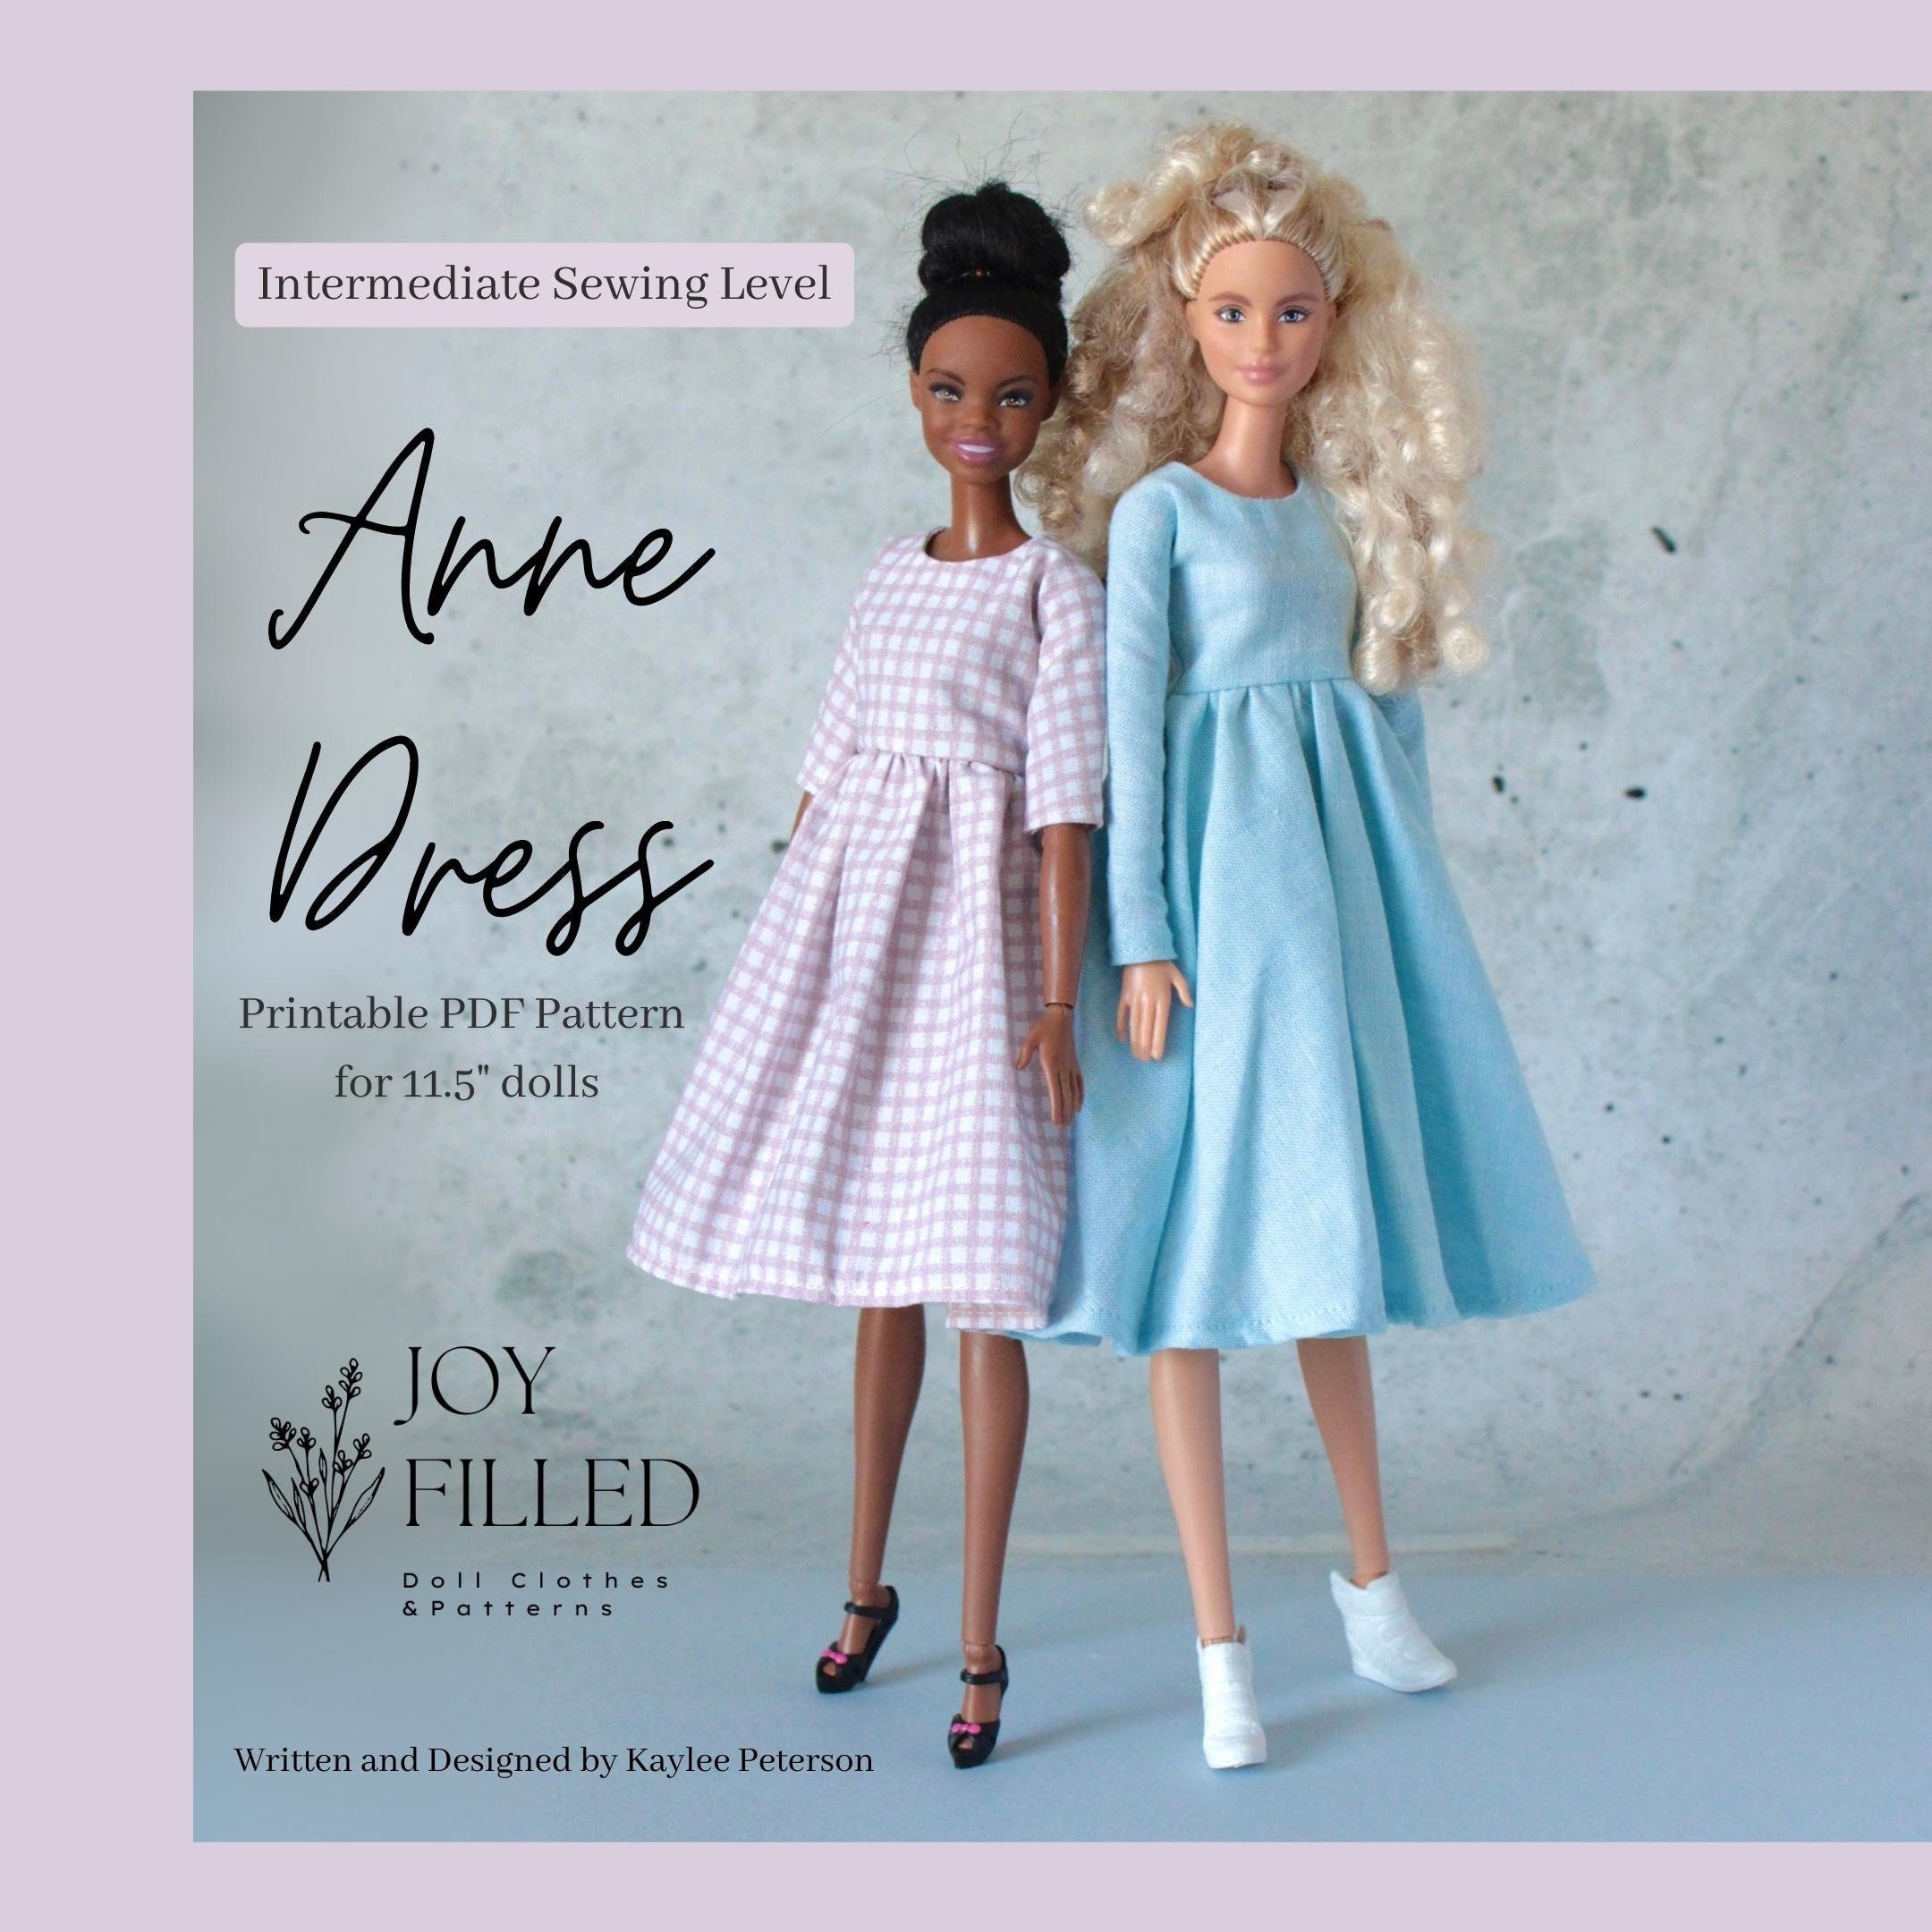 Reproduced McCalls 7311 - Barbie, Midge and Ken Doll Clothes Sewing  Patterns